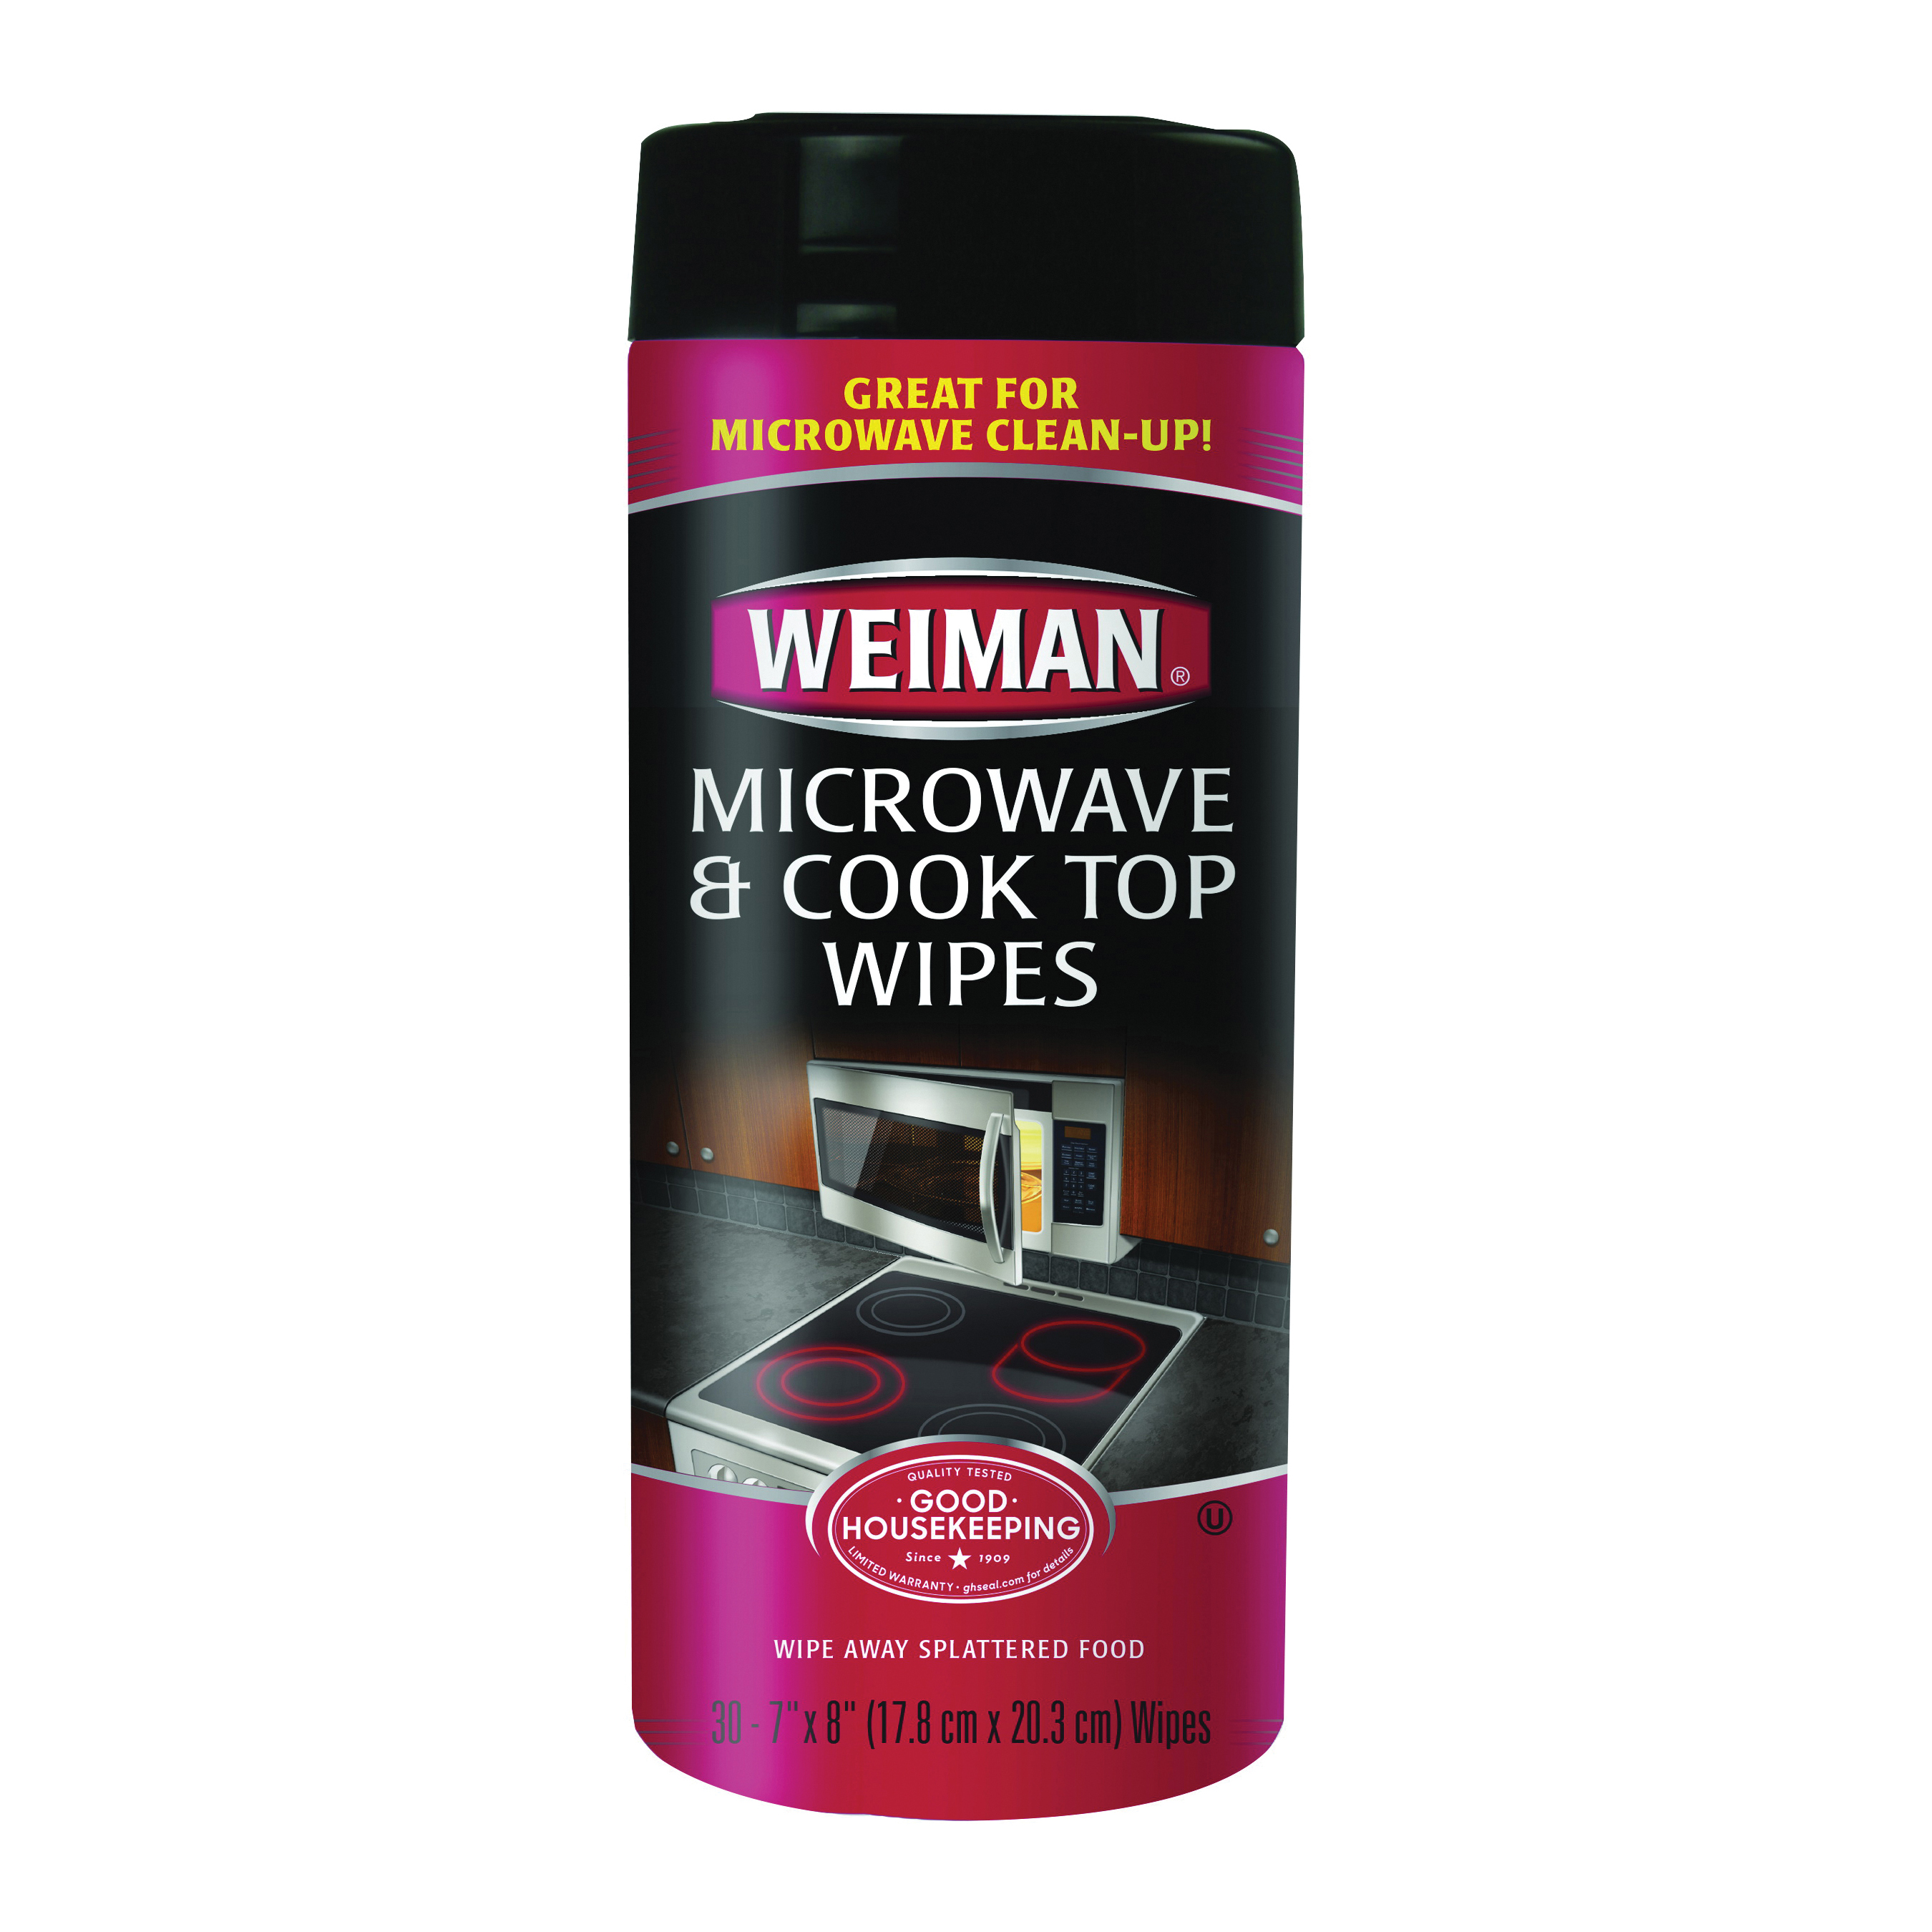 Weiman 90 Cook Top and Microwave Wipes, 7 in L, 8 in W - 4